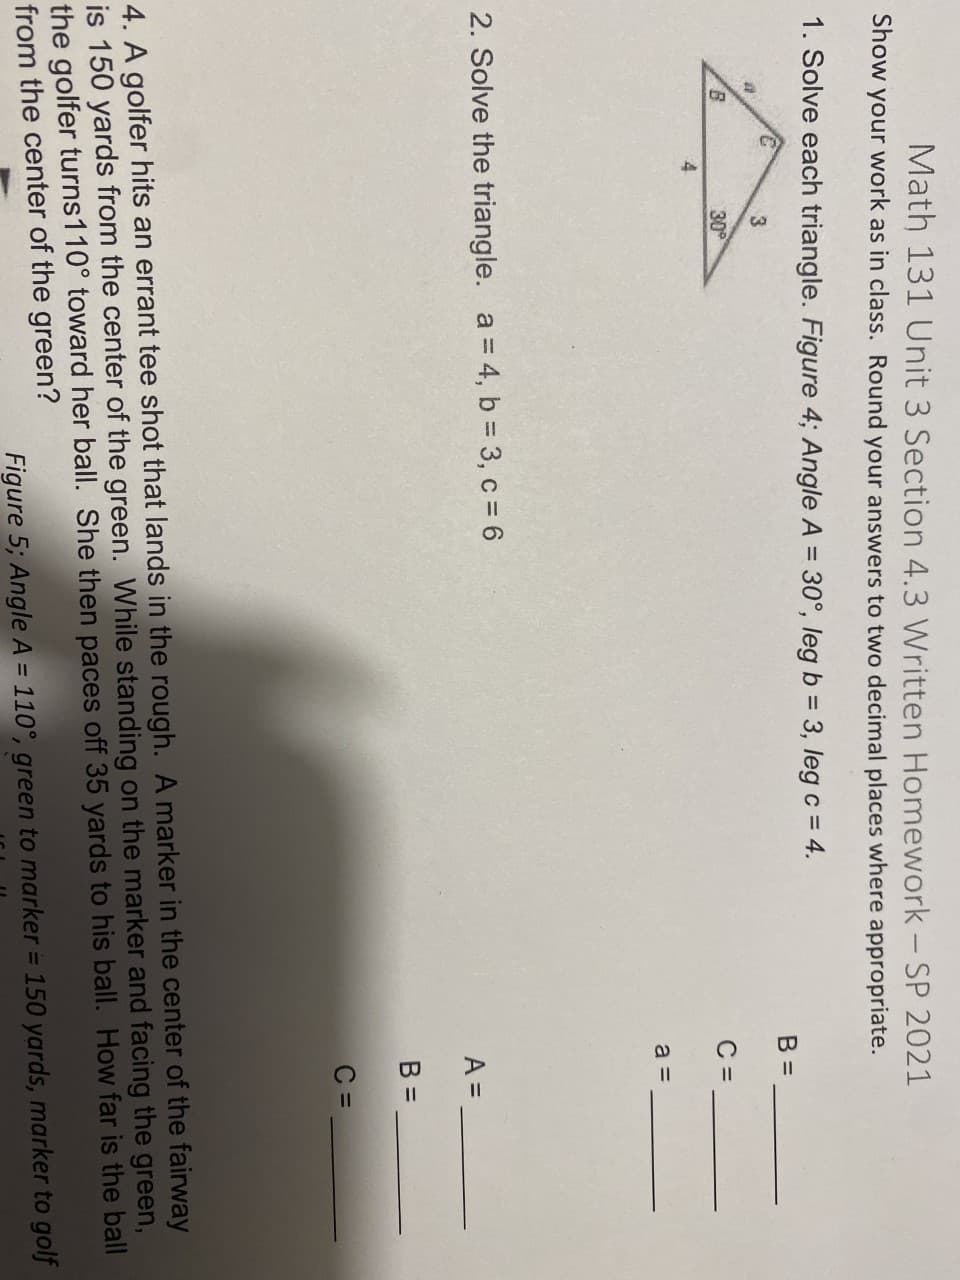 Math 131 Unit 3 Section 4.3 Written Homework - SP 2021
Show
your work as in class. Round your answers to two decimal places where appropriate.
1. Solve each triangle. Figure 4; Angle A = 30°, leg b = 3, leg c = 4.
%3D
B =
3
30
C =
a =
2. Solve the triangle. a = 4, b 3, c = 6
A =
B =
C =
4. A golfer hits an errant tee shot that lands in the rough. A marker in the center of the fairway
is 150 yards from the center of the green. While standing on the marker and facing the green,
the golfer turns110° toward her ball. She then paces off 35 yards to his ball. How far is the ball
from the center of the green?
Figure 5; Angle A = 110°, green to marker = 150 yards, marker to golf
%3D
